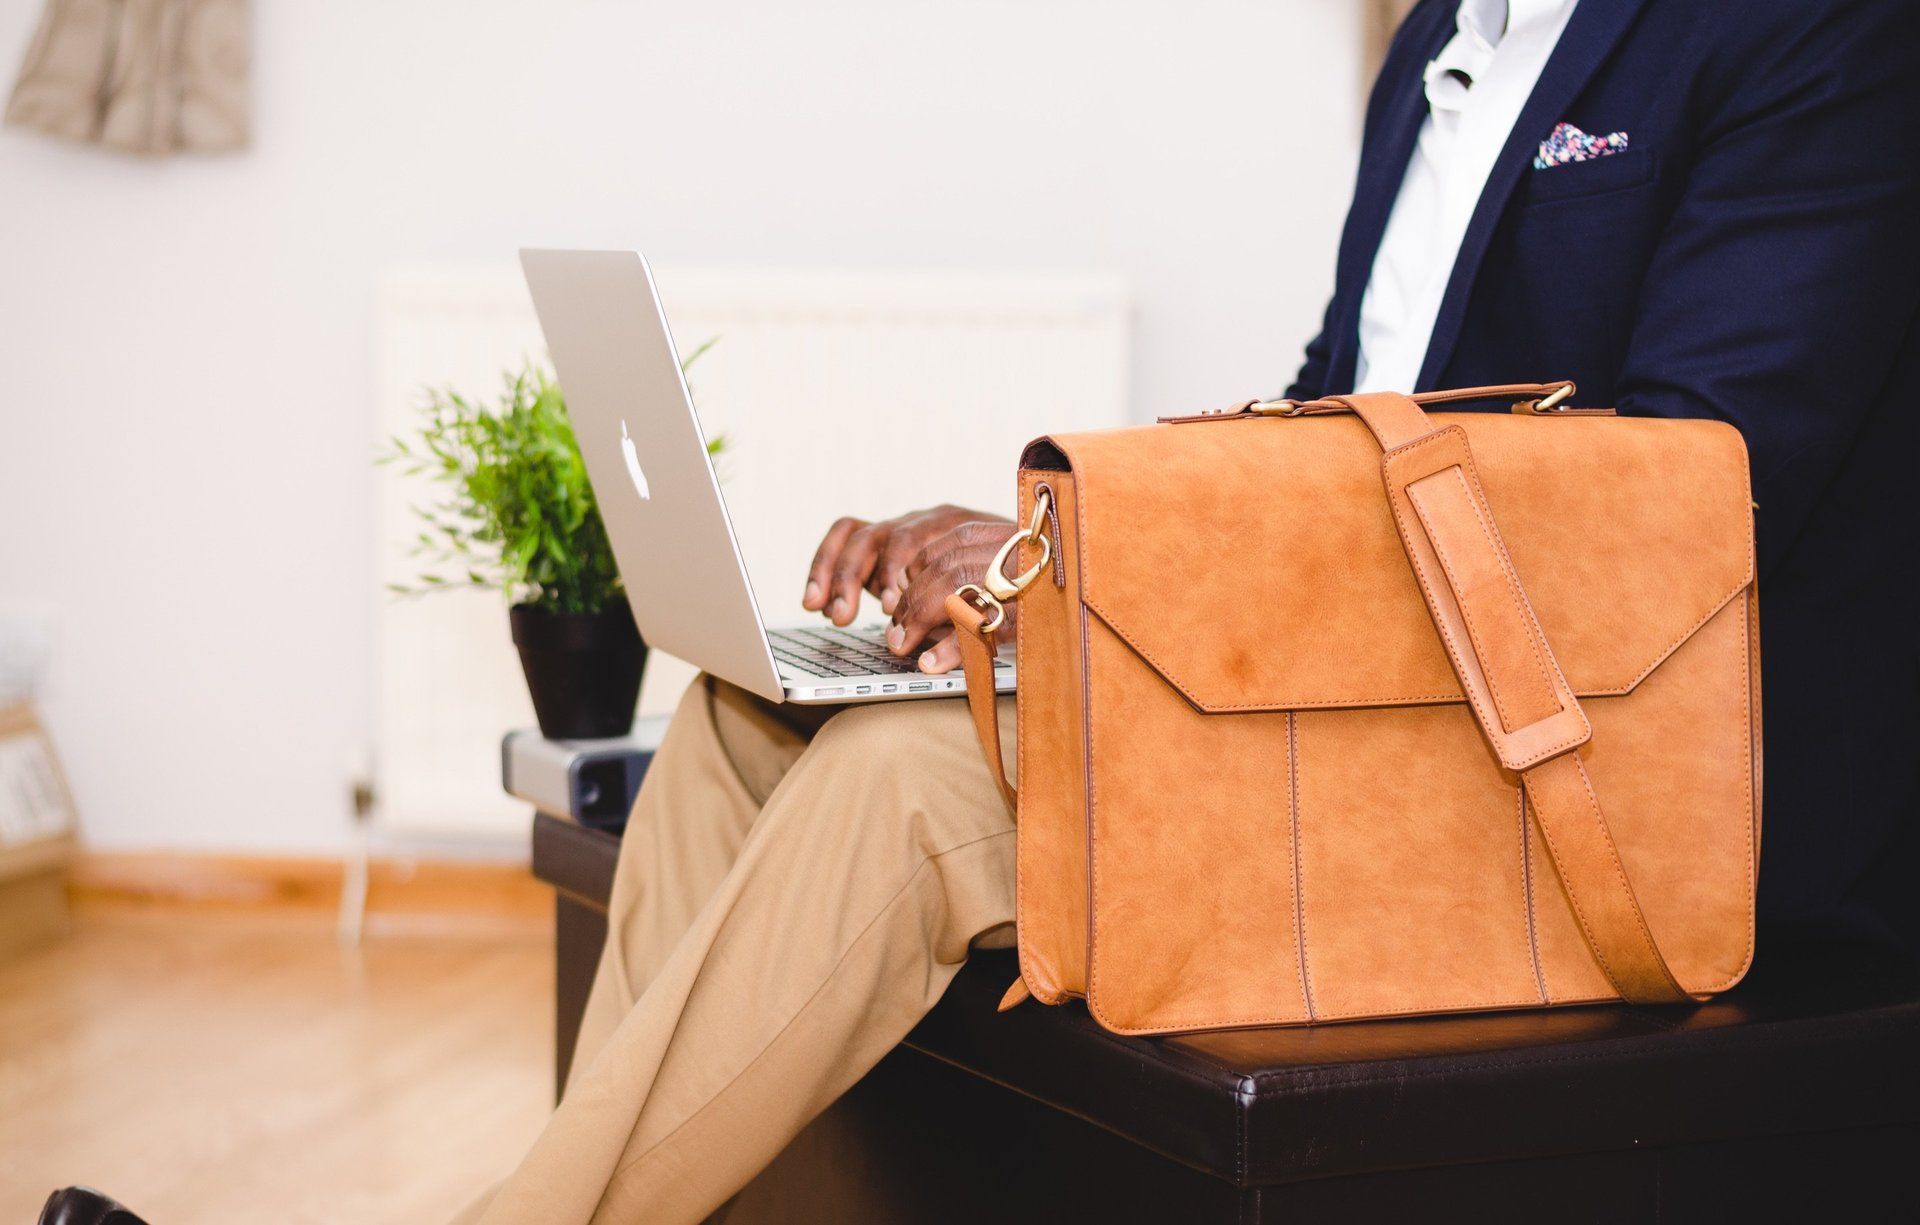 A business man sitting on a chair next to his brief case using a laptop